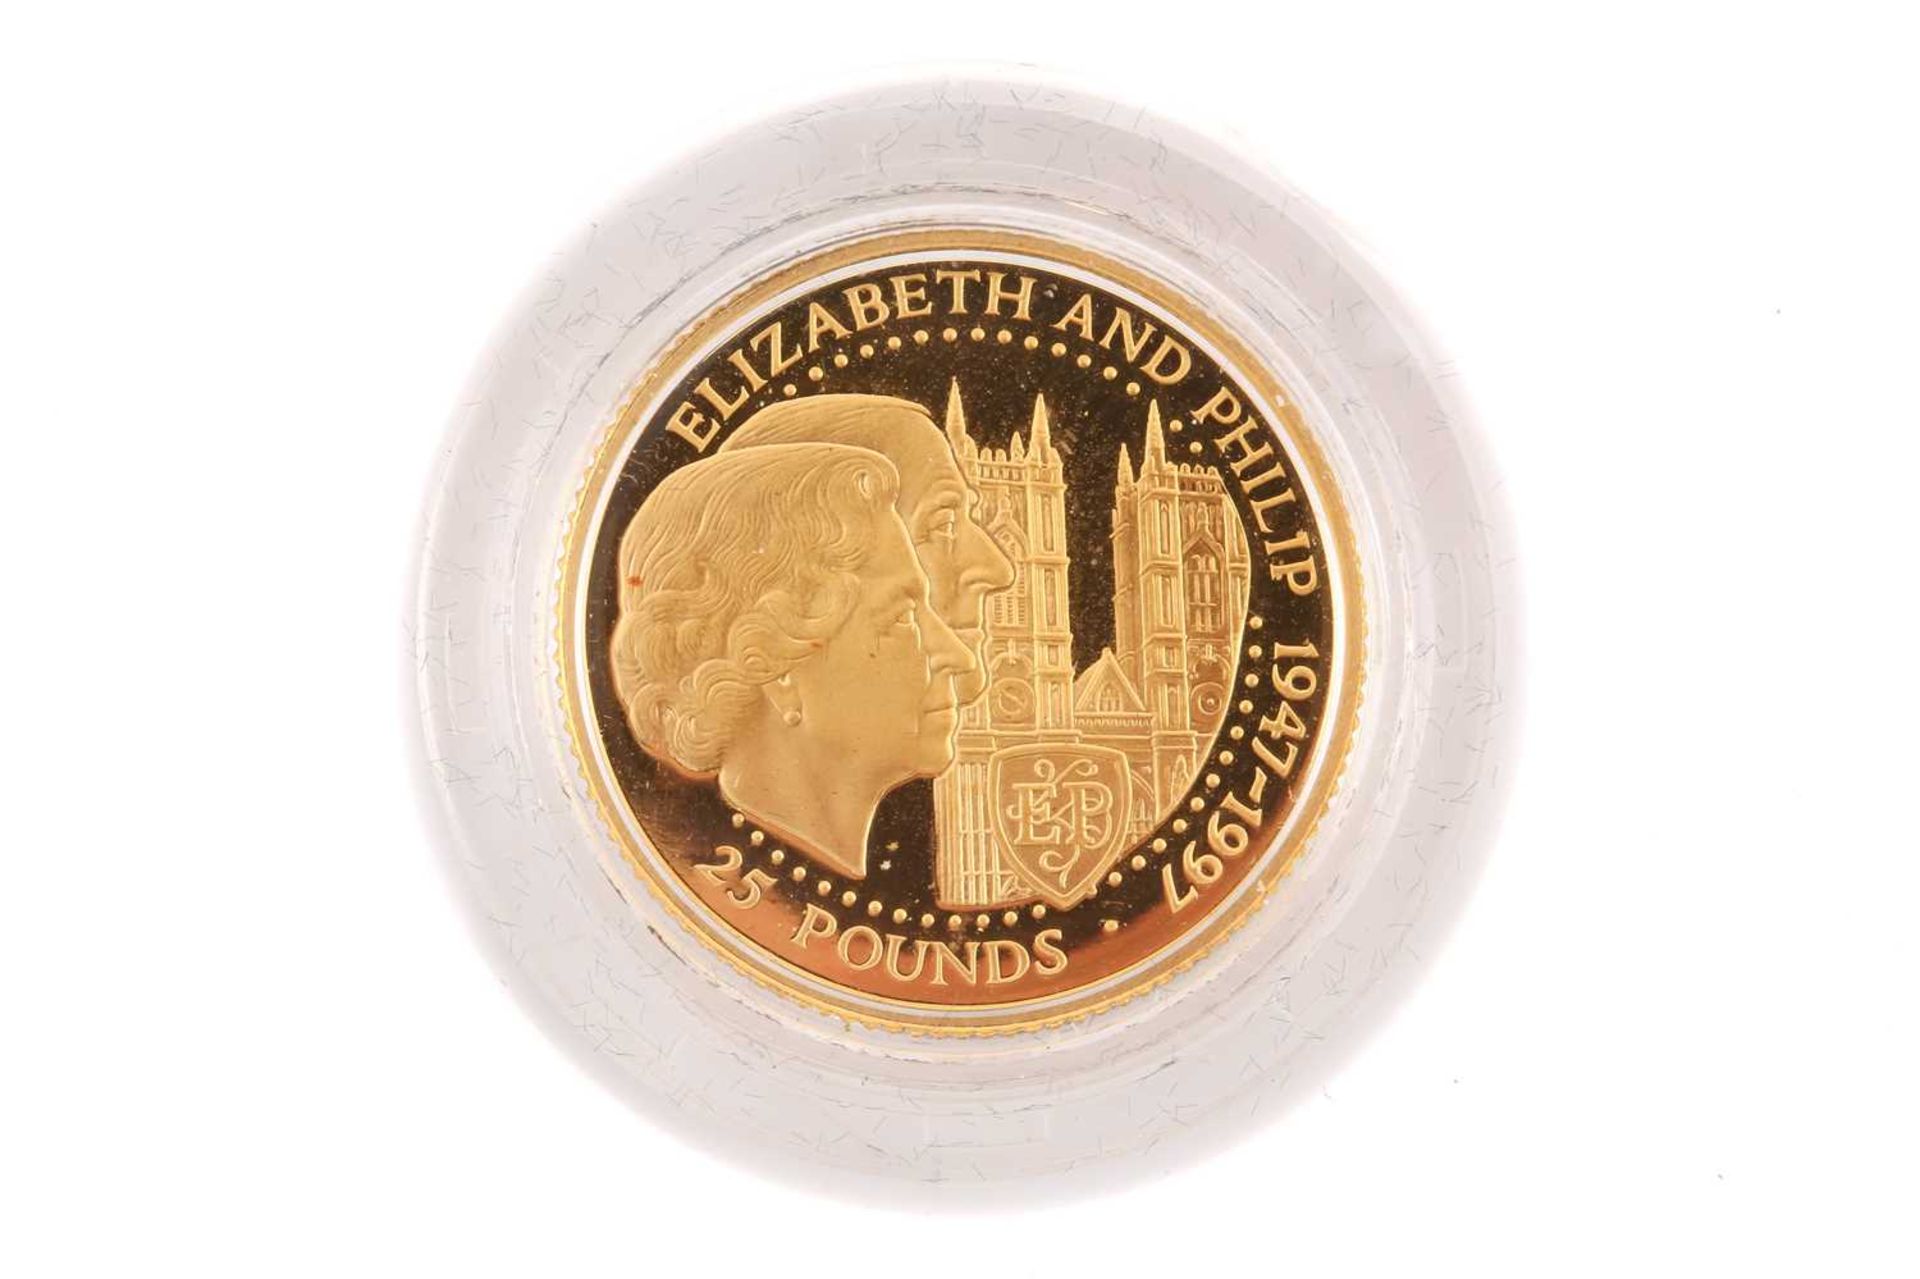 A 1997 Guernsey gold proof £25 coin, minted to celebrate the Golden Wedding Anniversary of Queen